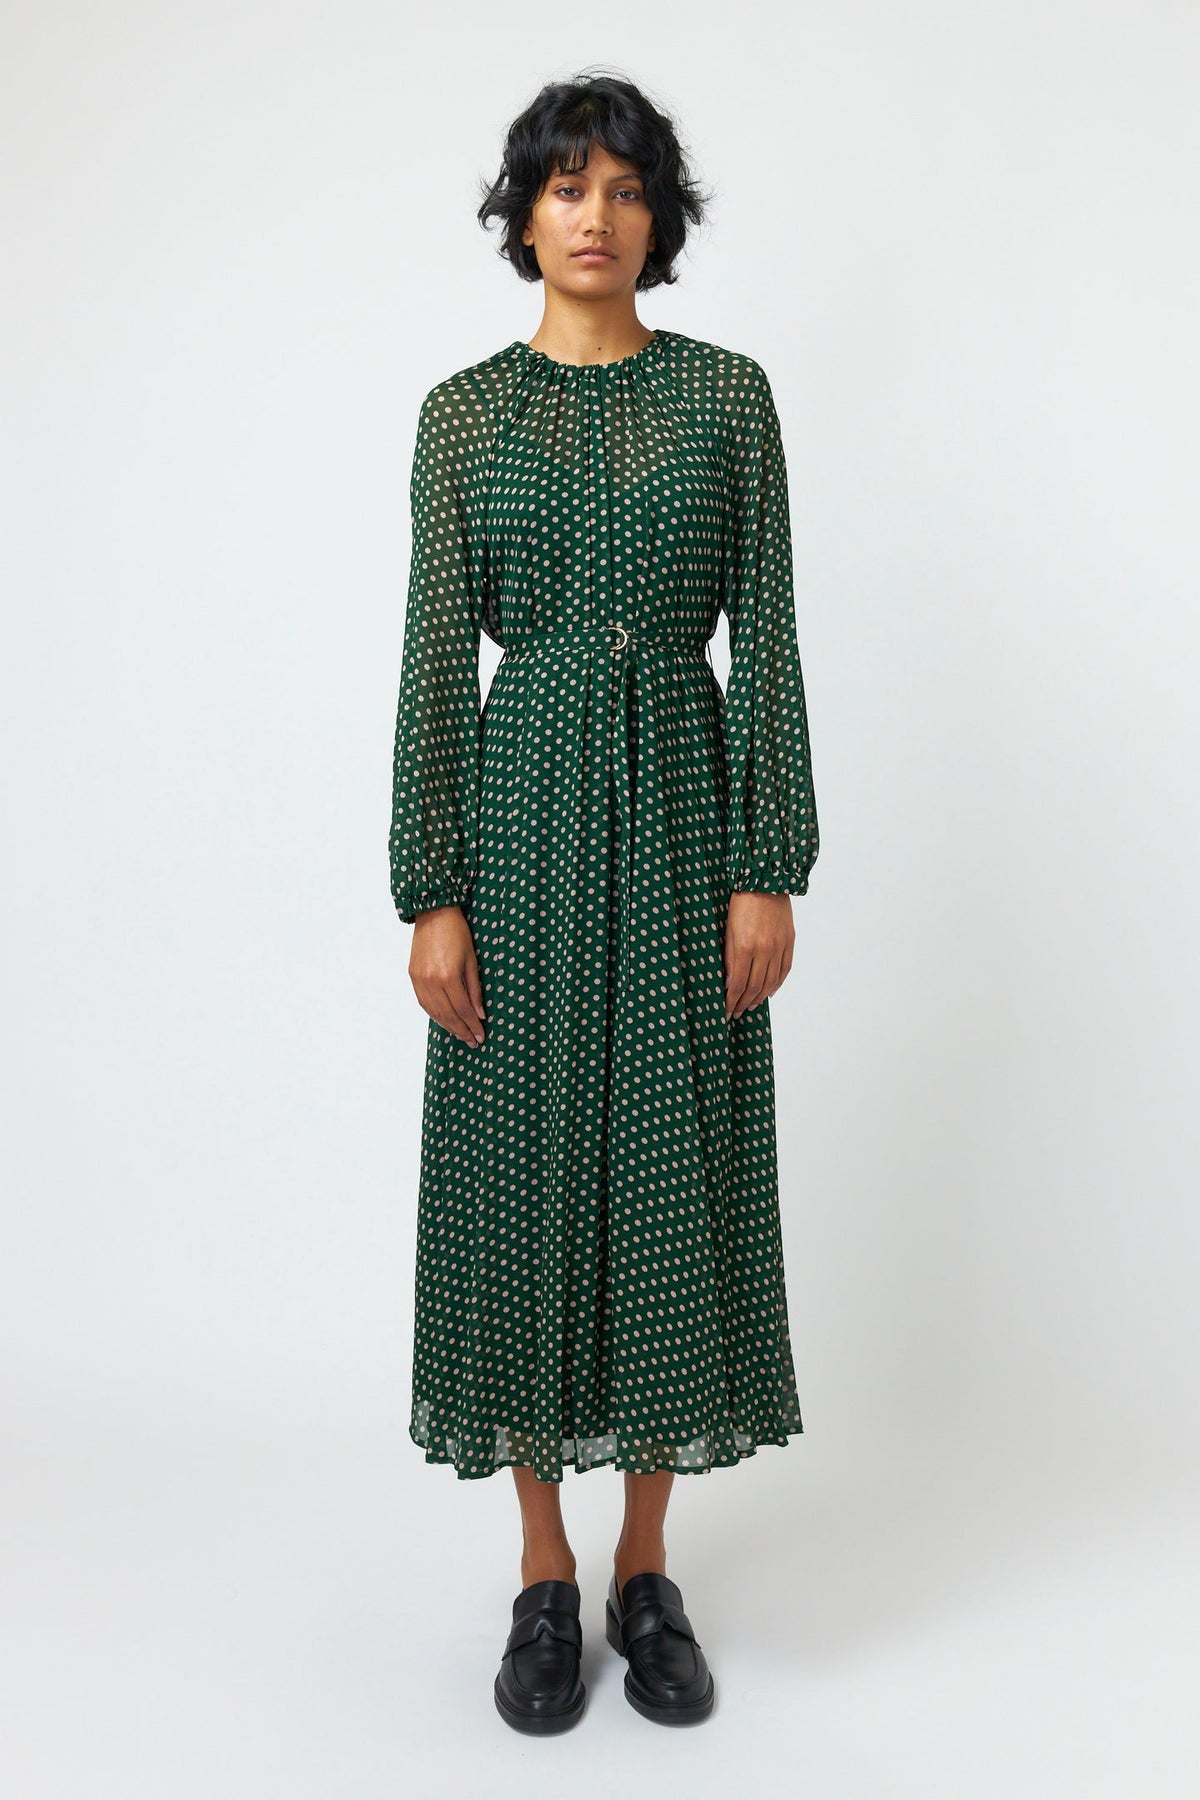 Kate Sylvester Suzanne Dress